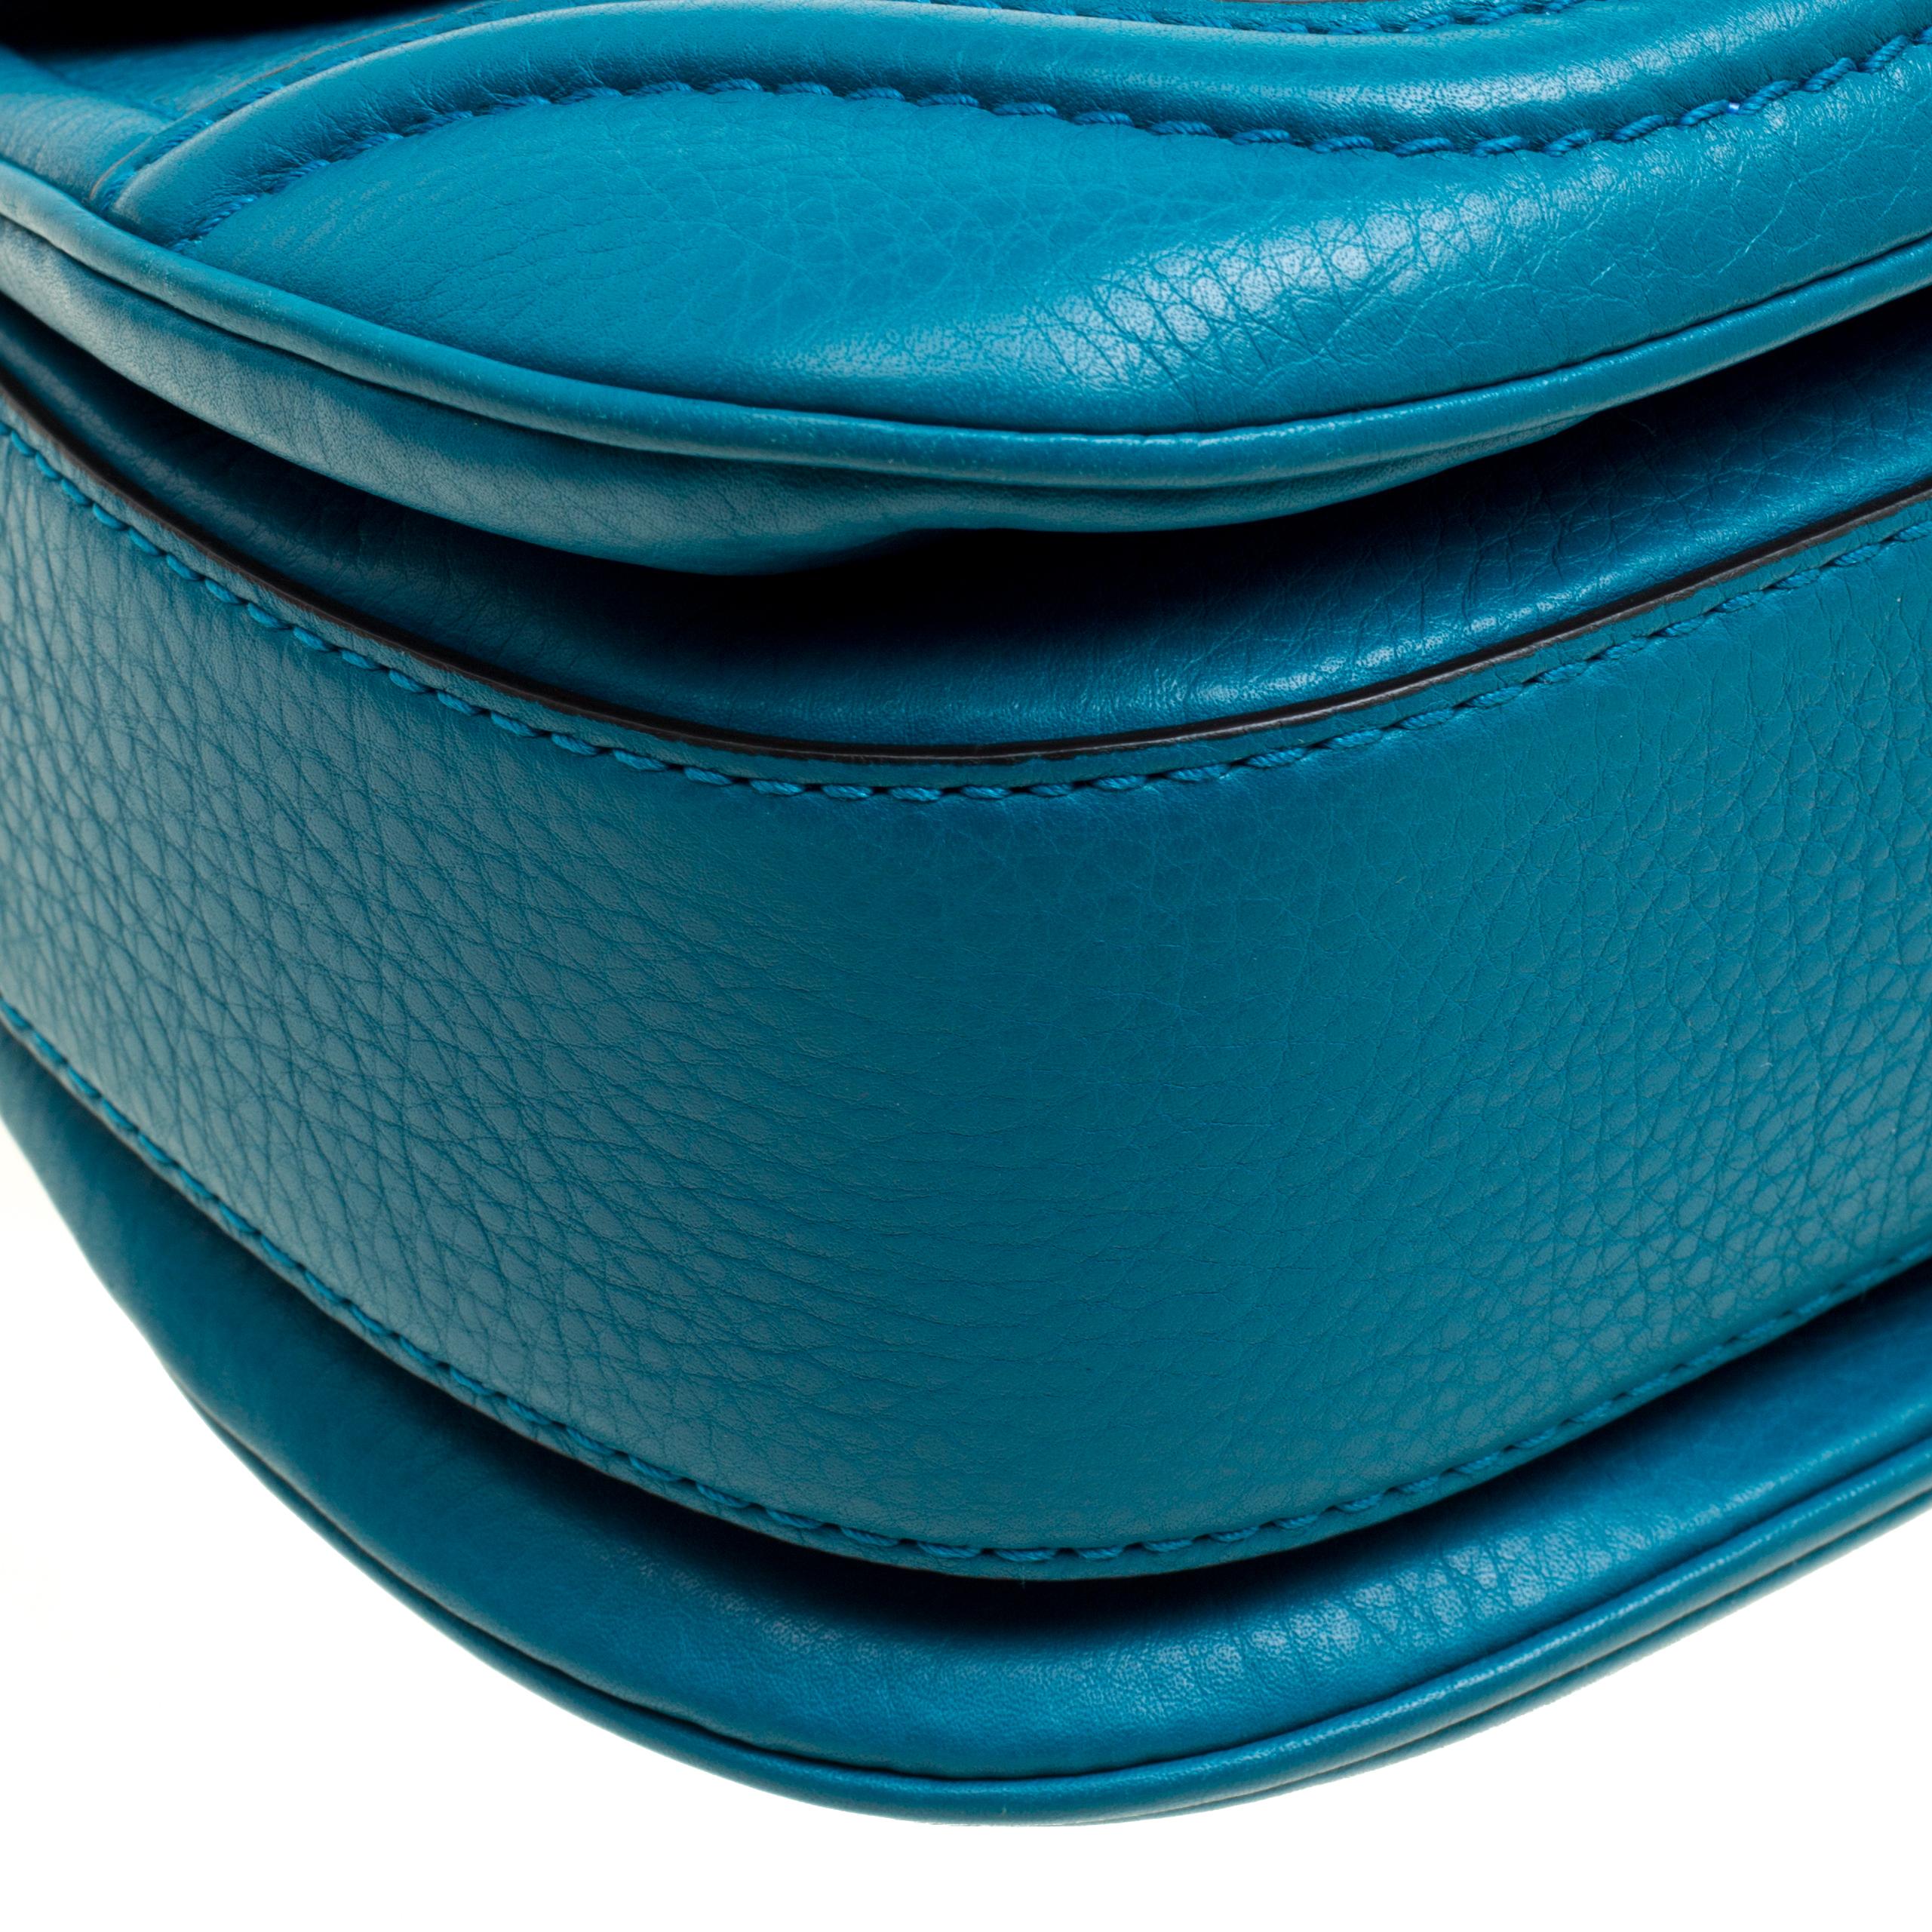 Gucci Teal Blue Leather Tassel New Bamboo Top Handle Bag 2